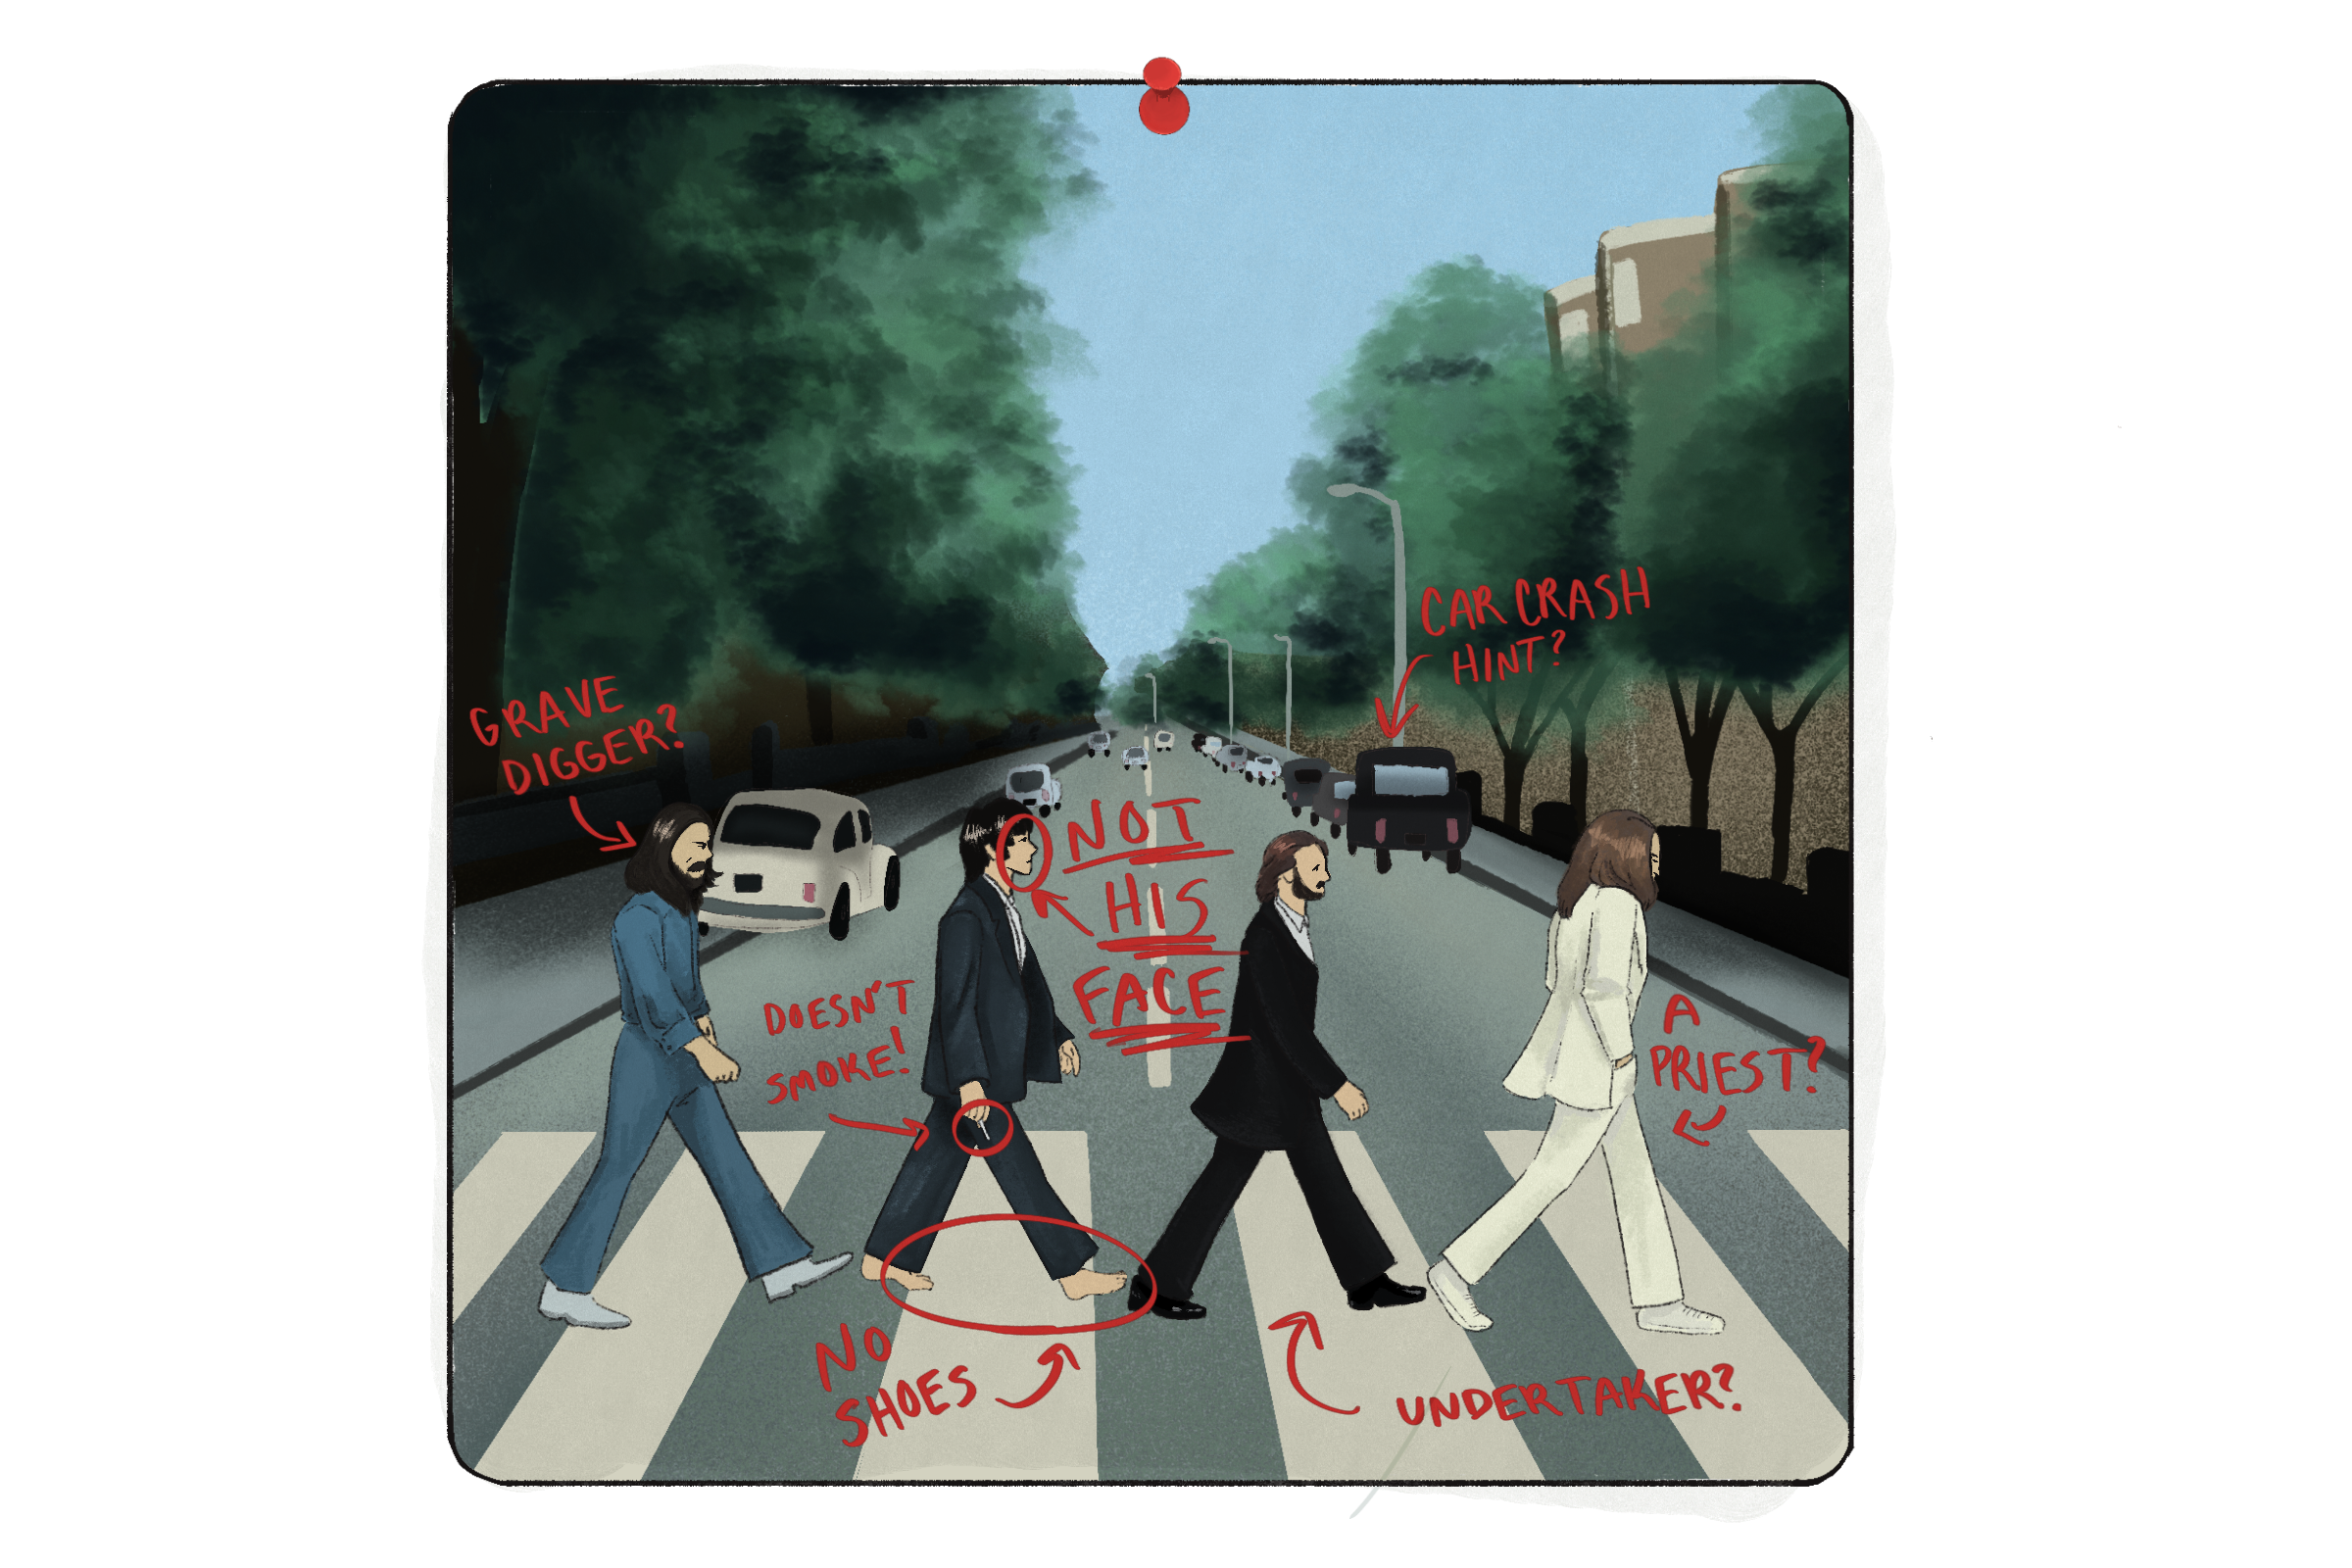 Illustration of the cover of Abbey Road pinned up. The cover is marked in red ink circling sections and writing the notes "not his face", "doesn't smoke", "car crash hint?," "no shoes", "grave digger?", "a undertaker?", and "a priest?" referring to various parts.